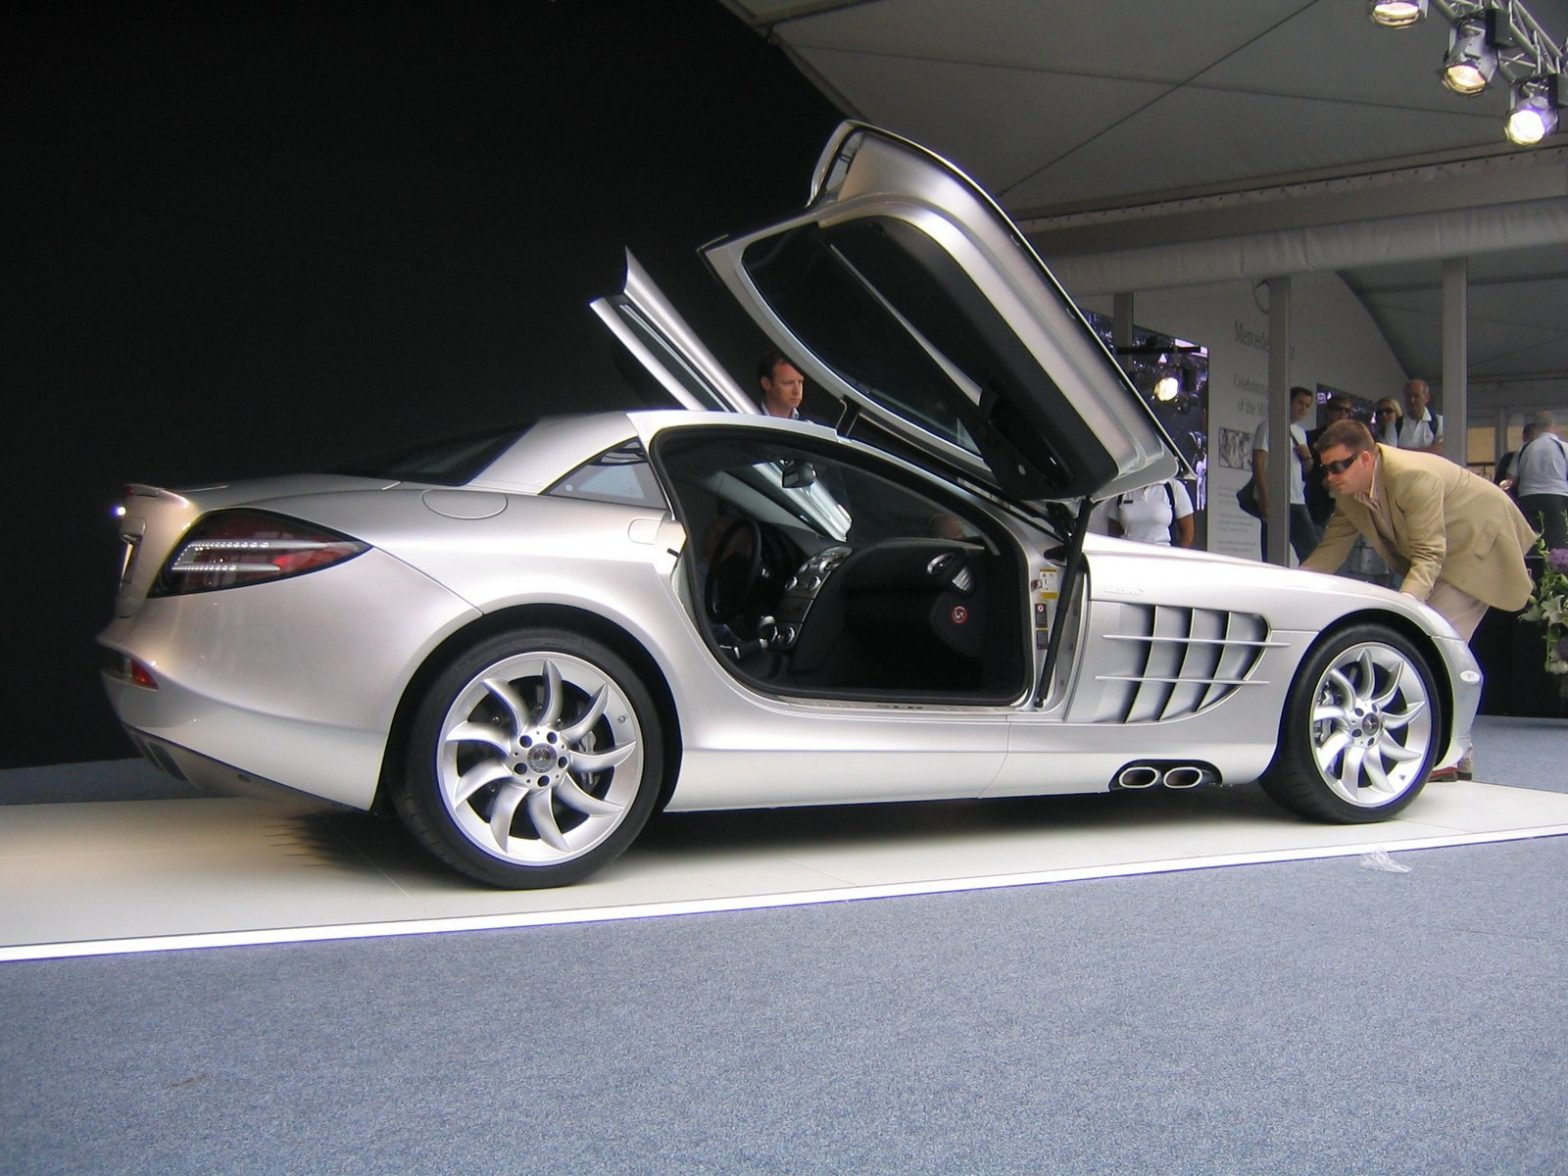 Sports Car Shows All over the World